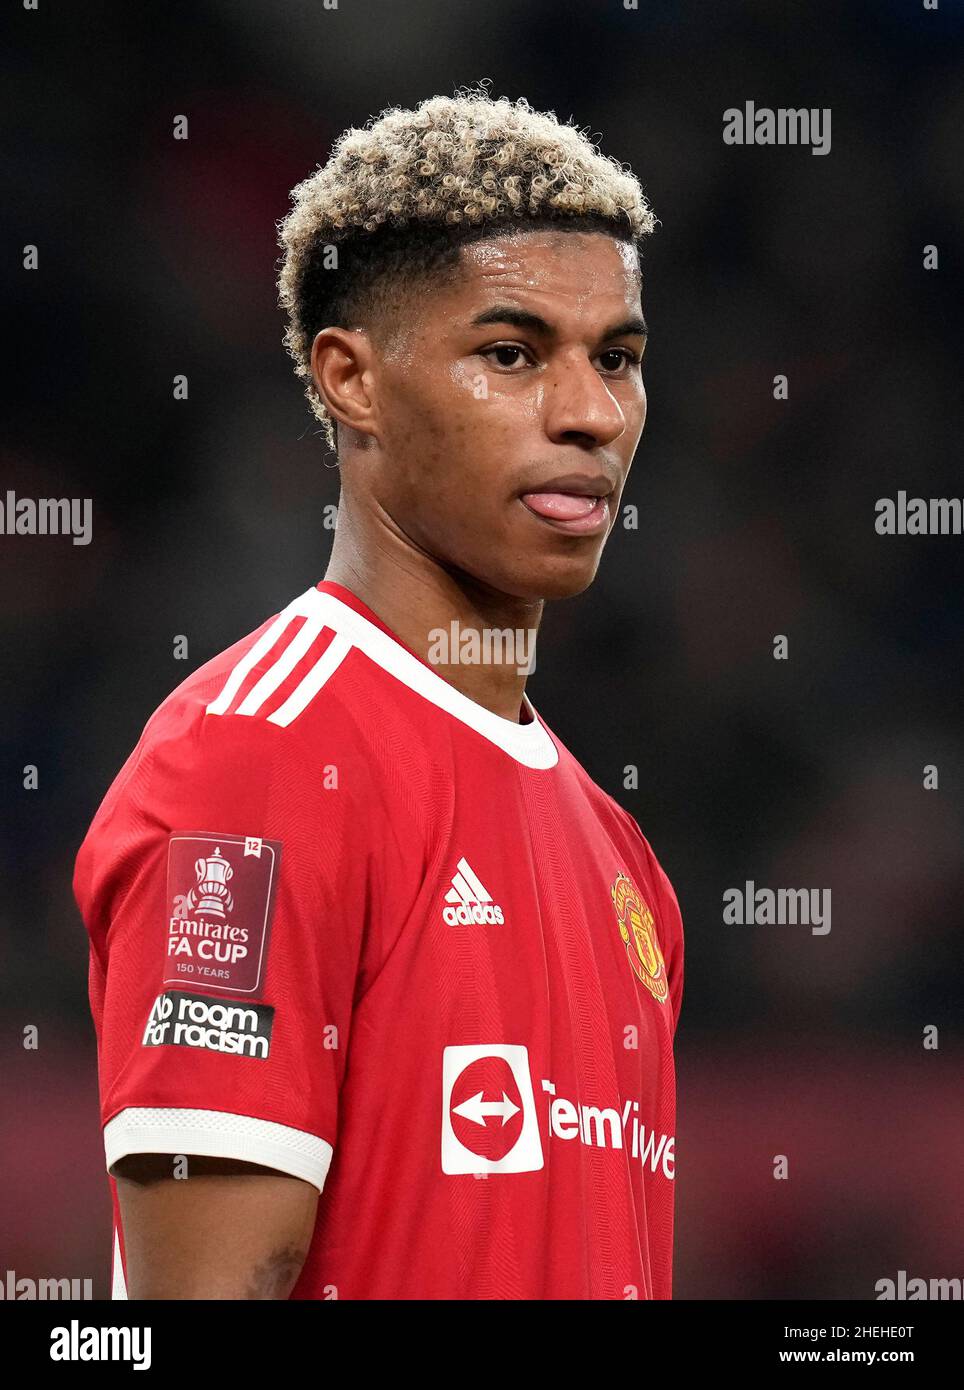 manchester-england-10th-january-2022-marcus-rashford-of-manchester-united-during-the-emirates-...jpg